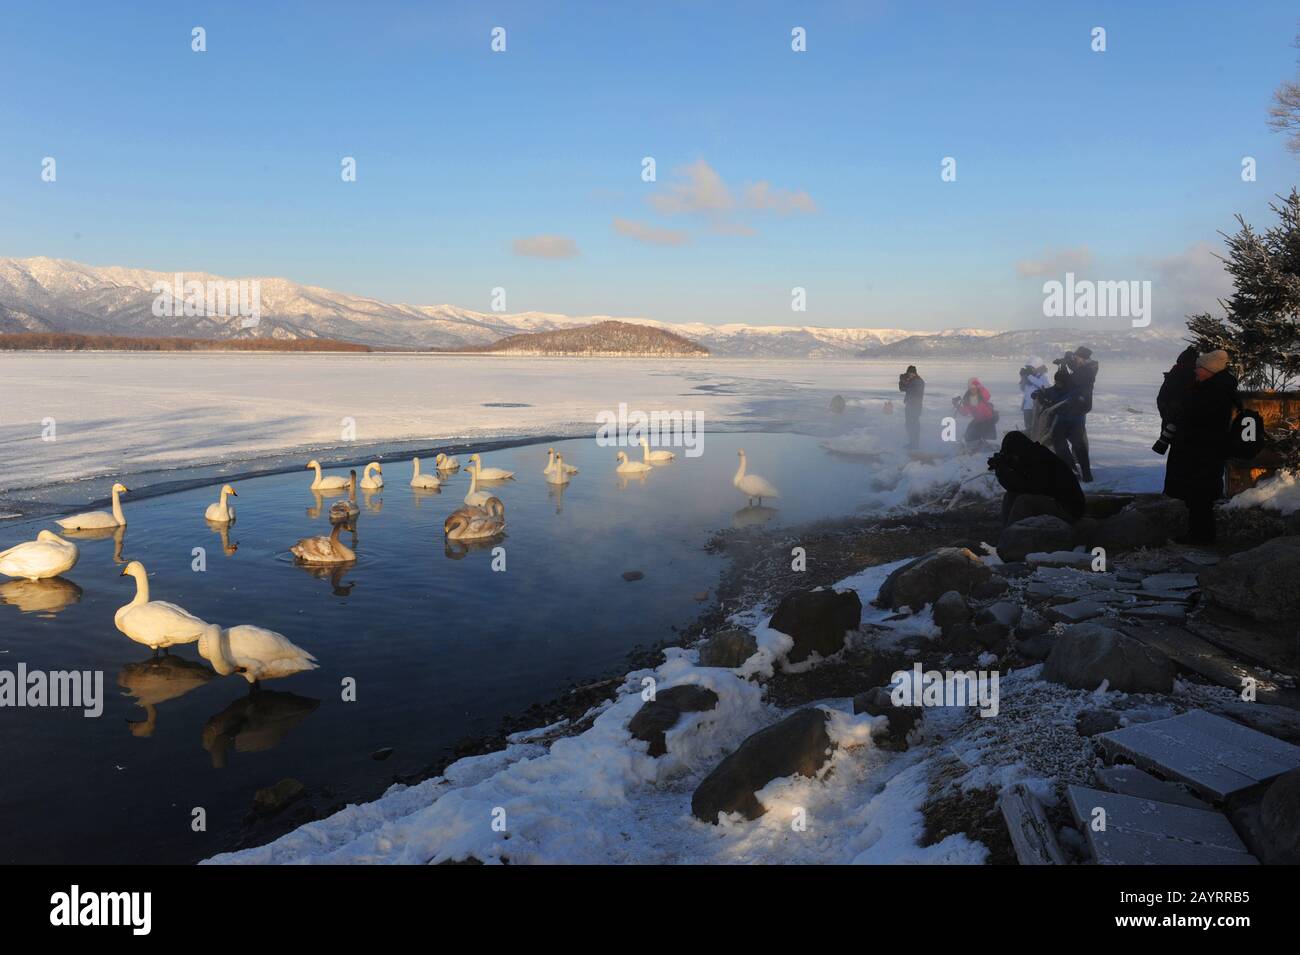 People photographing Whooper swans (Cygnus cygnus) at the hot springs area of Lake Kussharo, which is a caldera lake in Akan National Park, eastern Ho Stock Photo